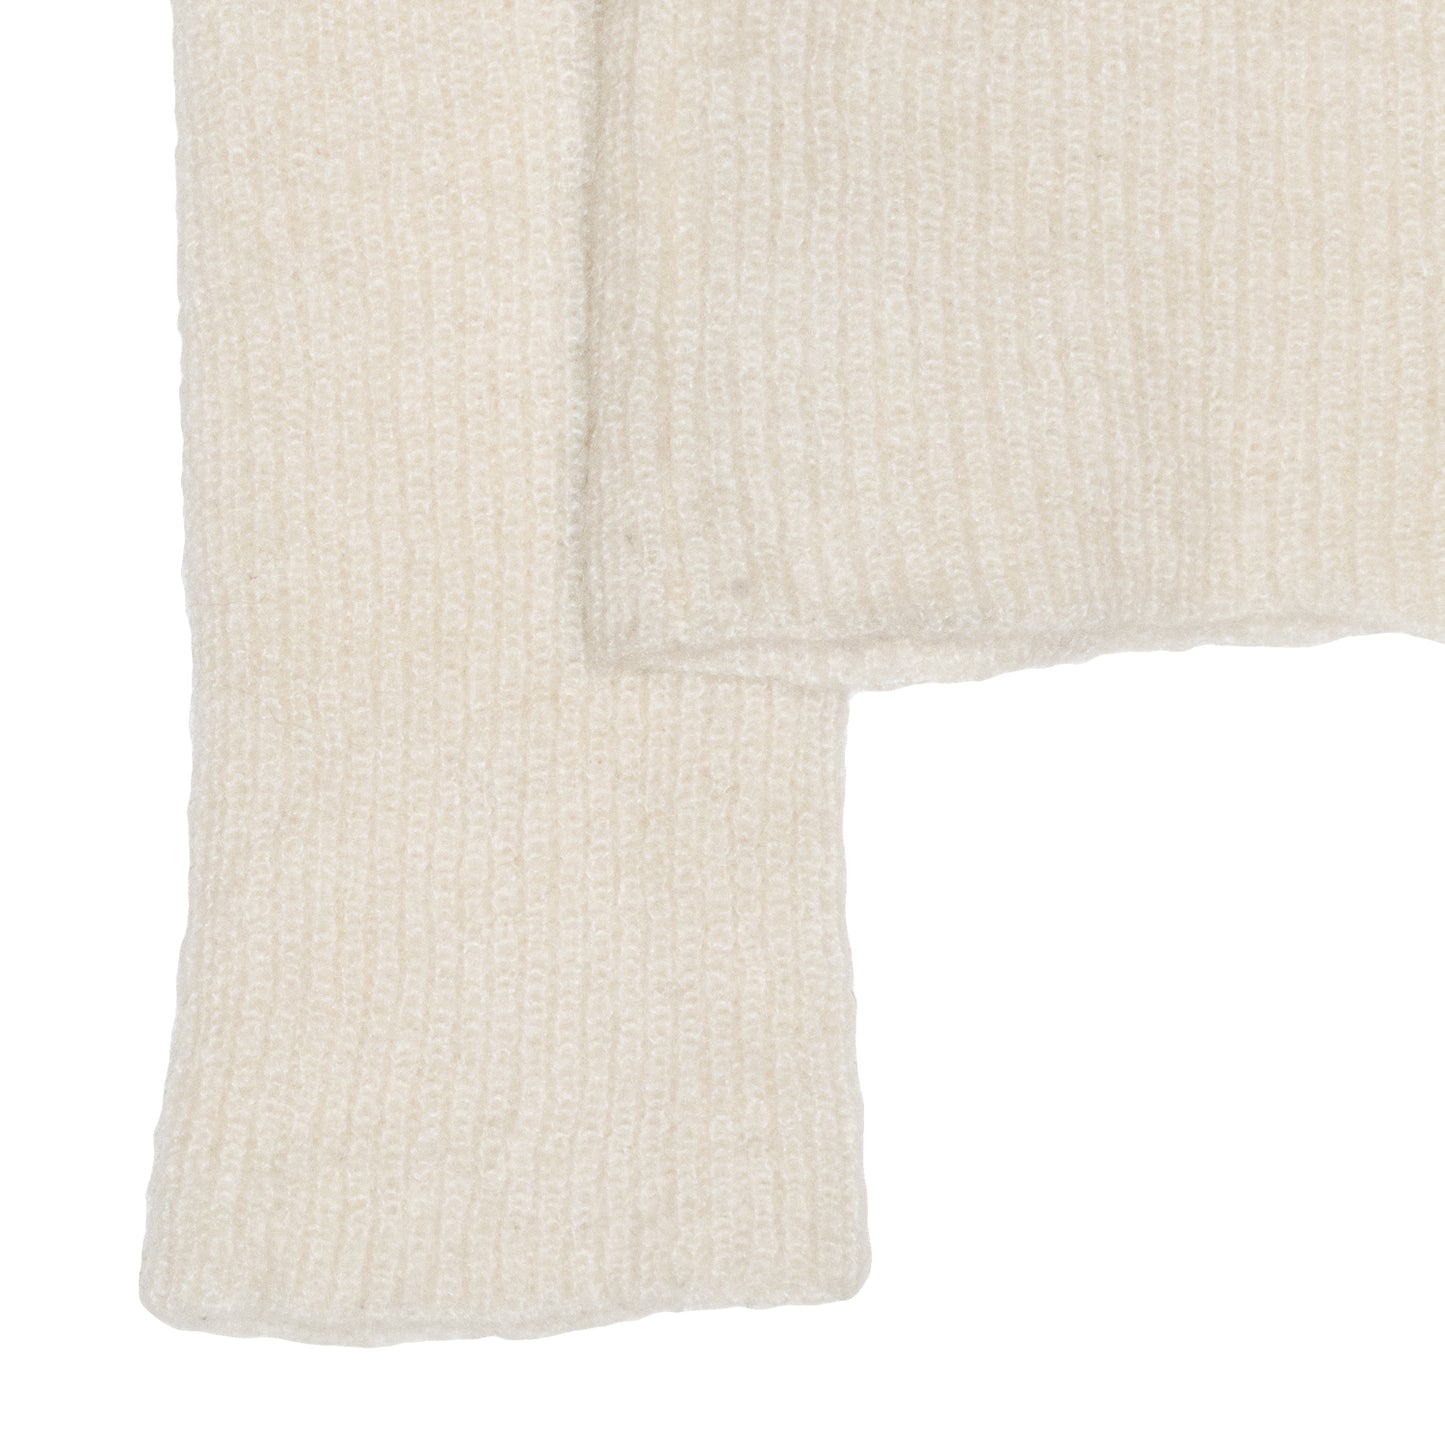 Comme des Garçons GIRL Friendship and Youth Energy Mohair Knit Sweater – AD2015